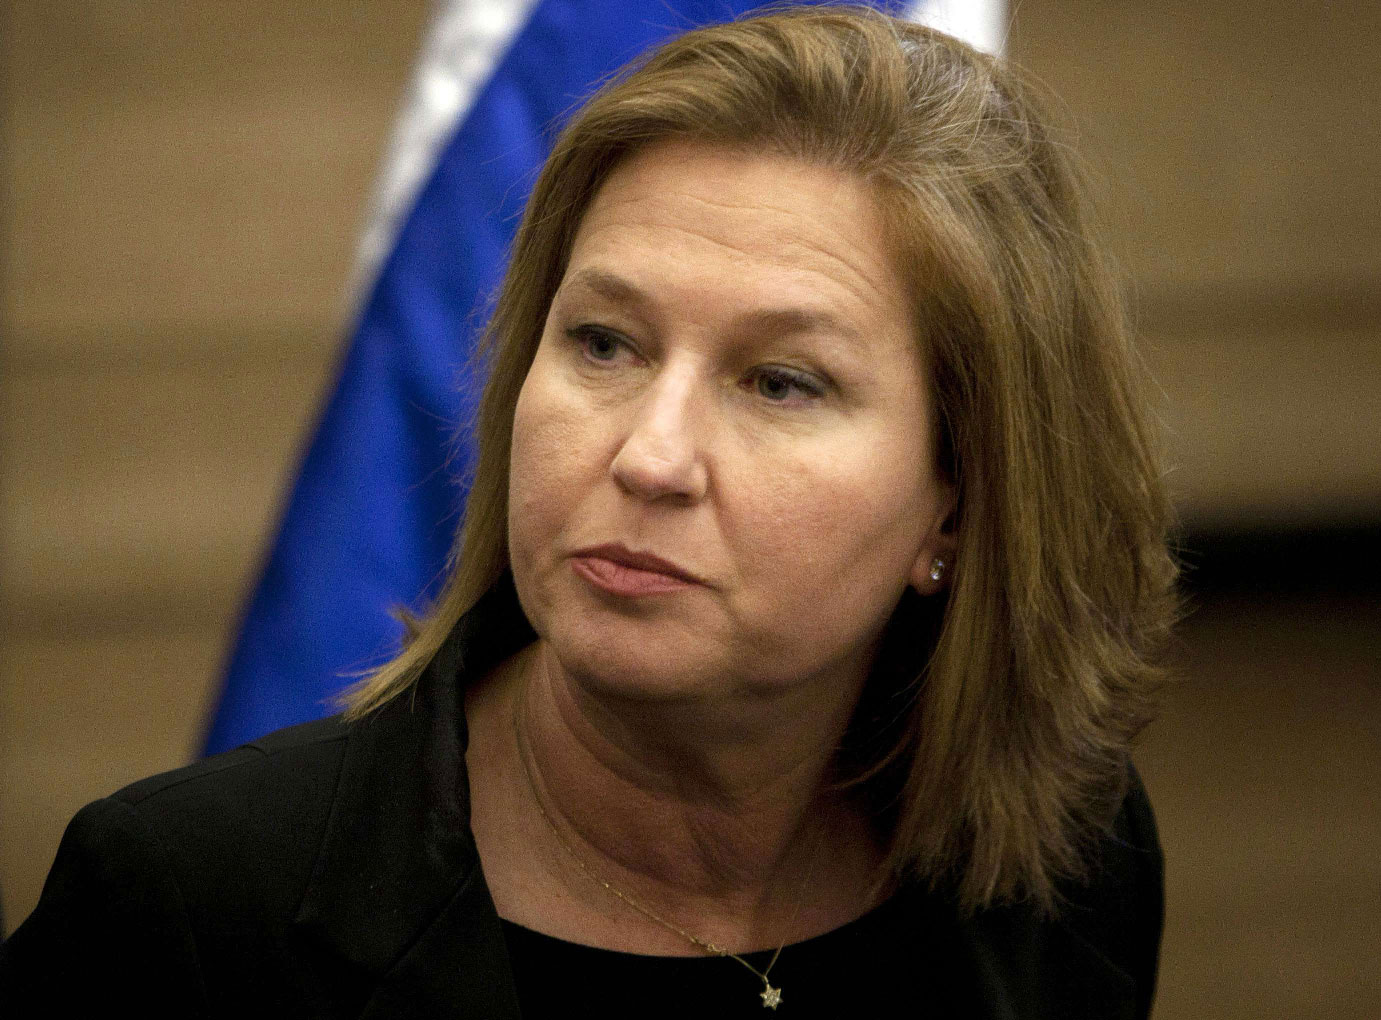 In this Wednesday, Nov. 30, 2011 file photo, former Israeli Foreign Minister Tzipi Livni attends a news conference at the Knesset, Israel's parliament, in Jerusalem.